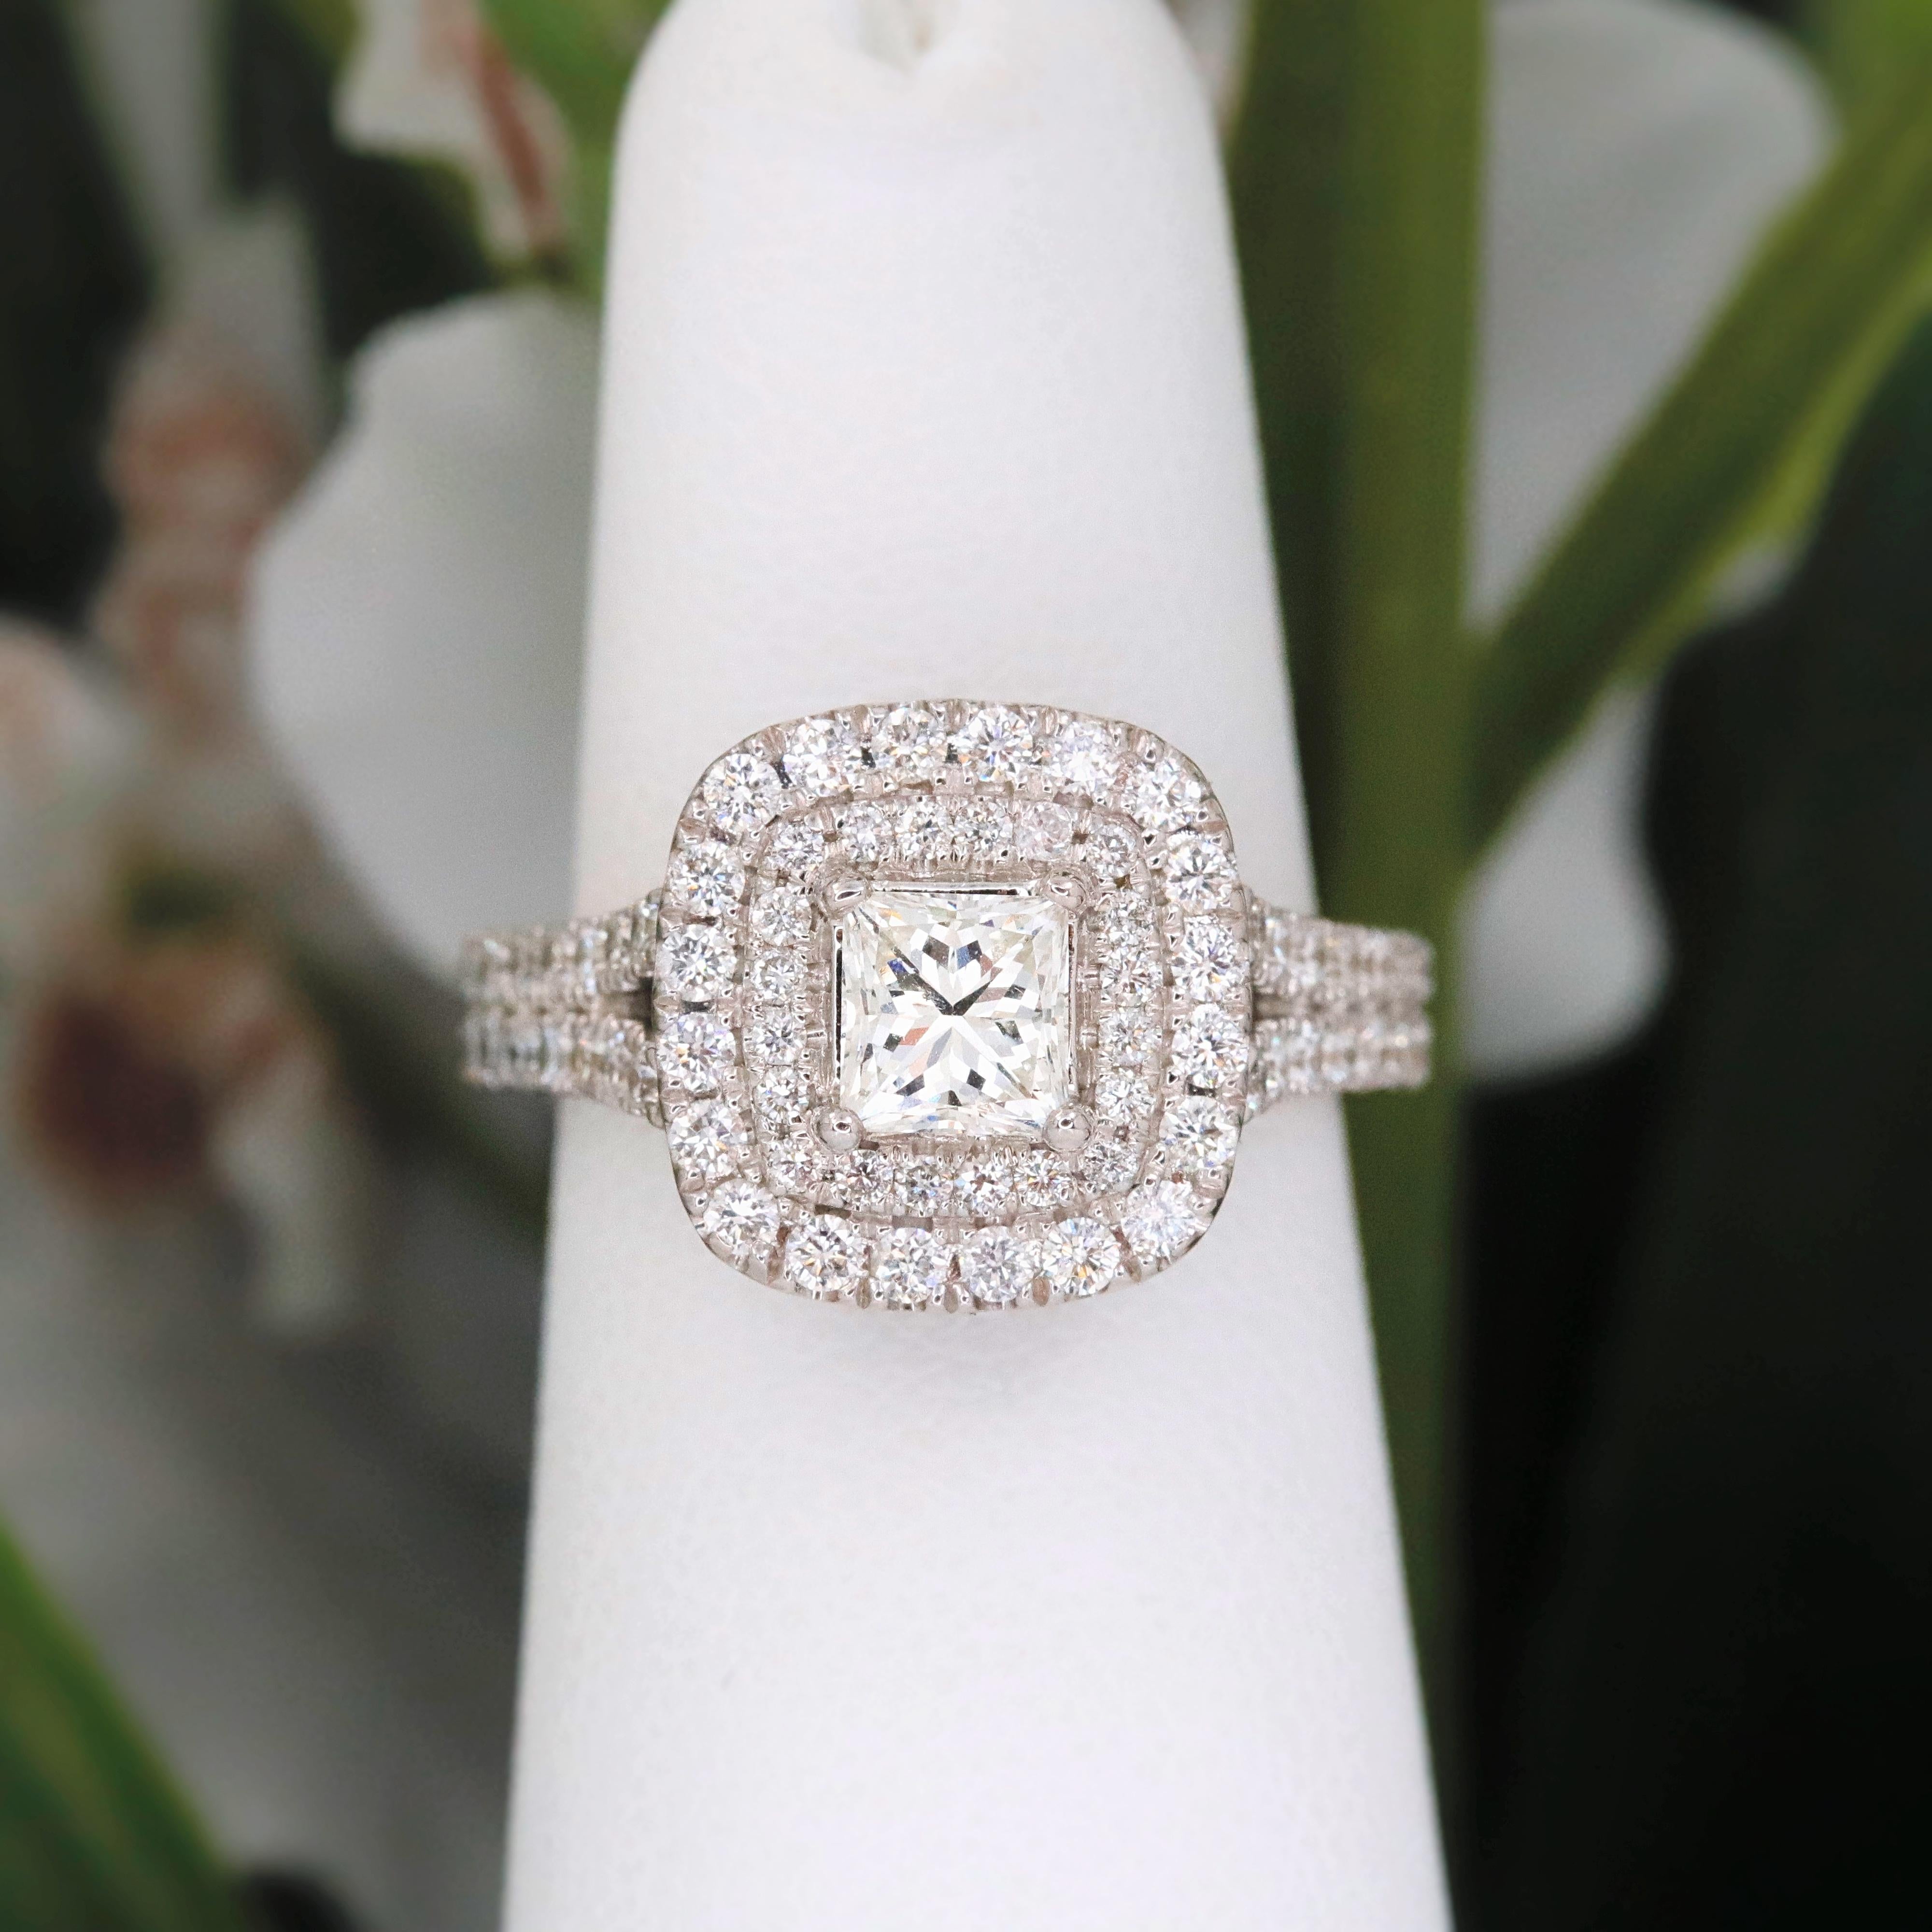 Vera Wang Love Collection Diamond Engagement Ring 

Style: Frame Split-Shank 
Metal: 14 kt White Gold
Size: 6 - sizable
Total Carat Weight: 1.50 tcw
Diamond Shape: Princess-Cut Diamond 0.50 cts
Diamonds Color & Clarity: I color, SI2 clarity
Accent